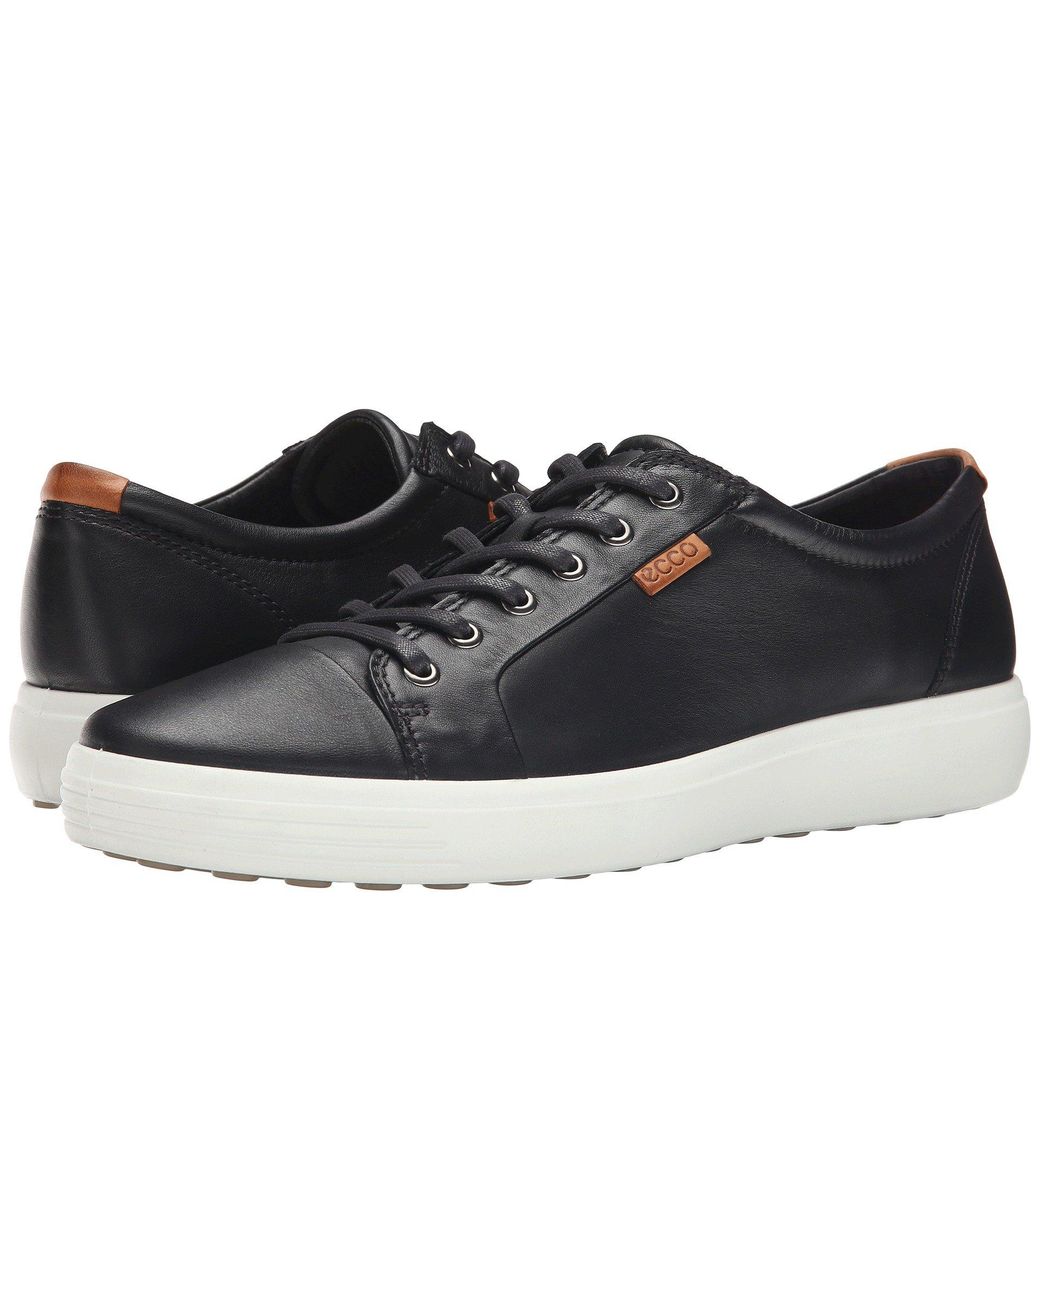 Ecco Leather Soft 7 Sneaker Lace Up Casual Shoes in Black for Men - Lyst